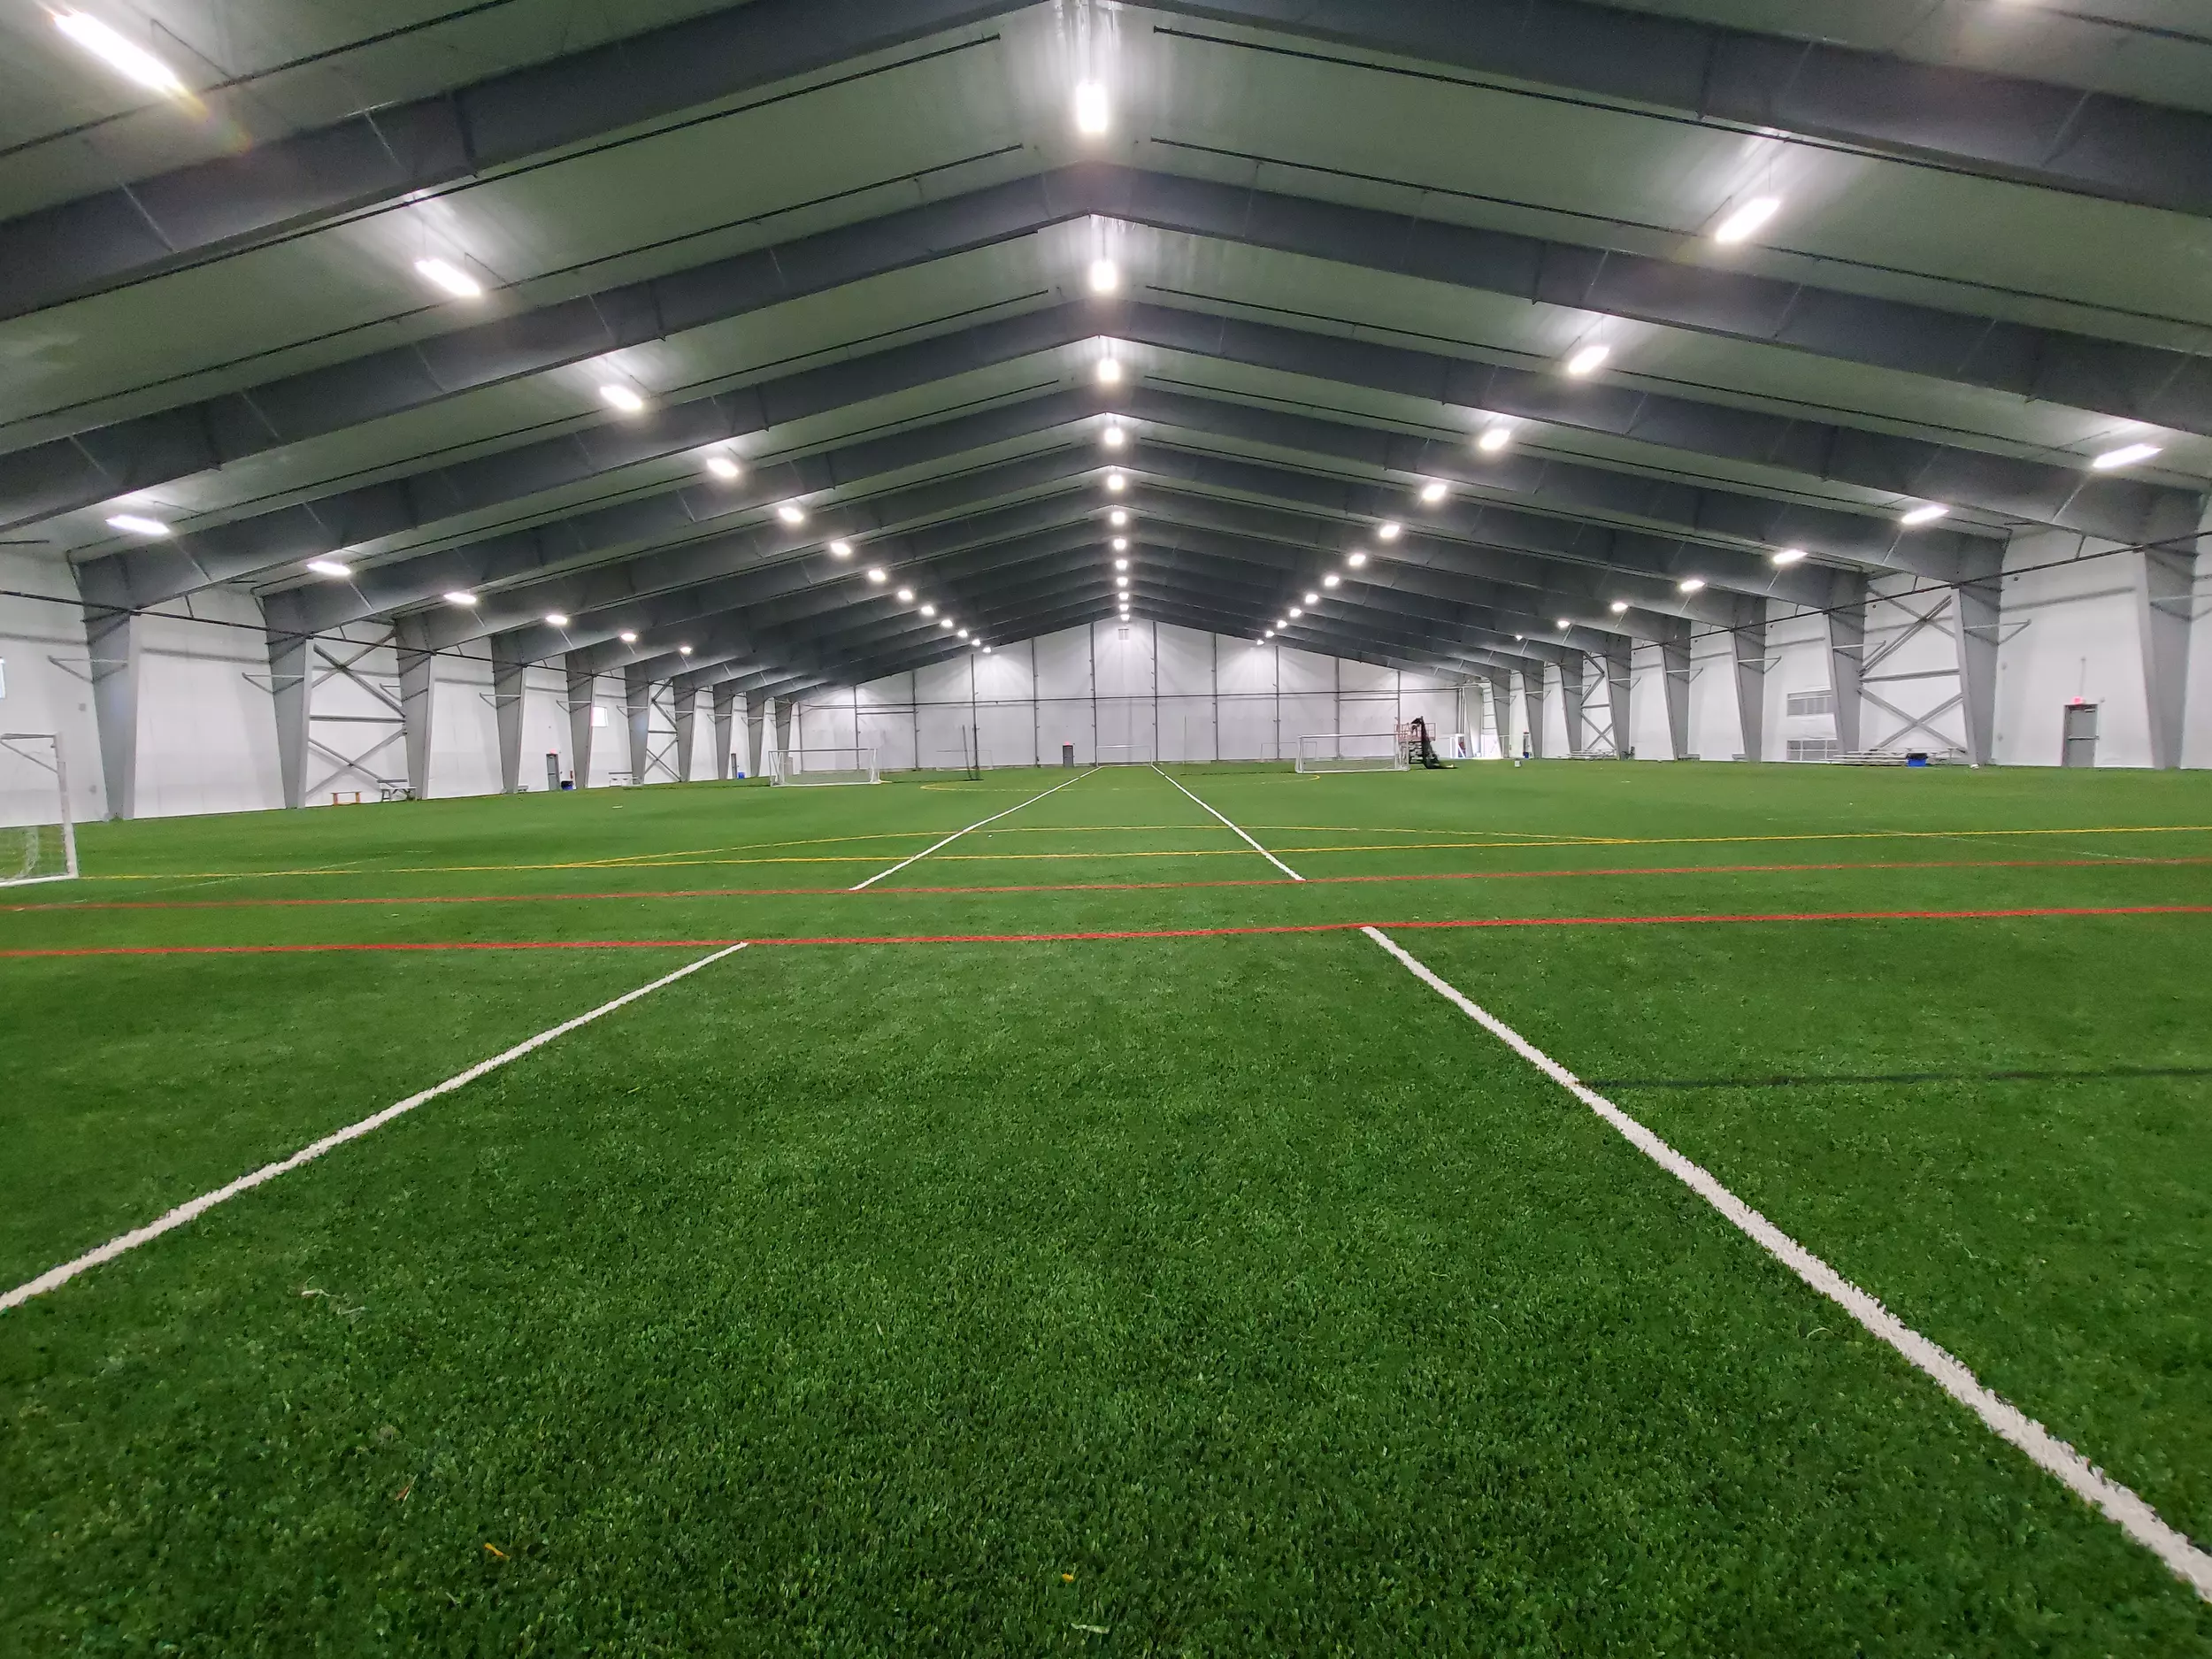 Construction Completed at Greater Binghamton Sports Complex